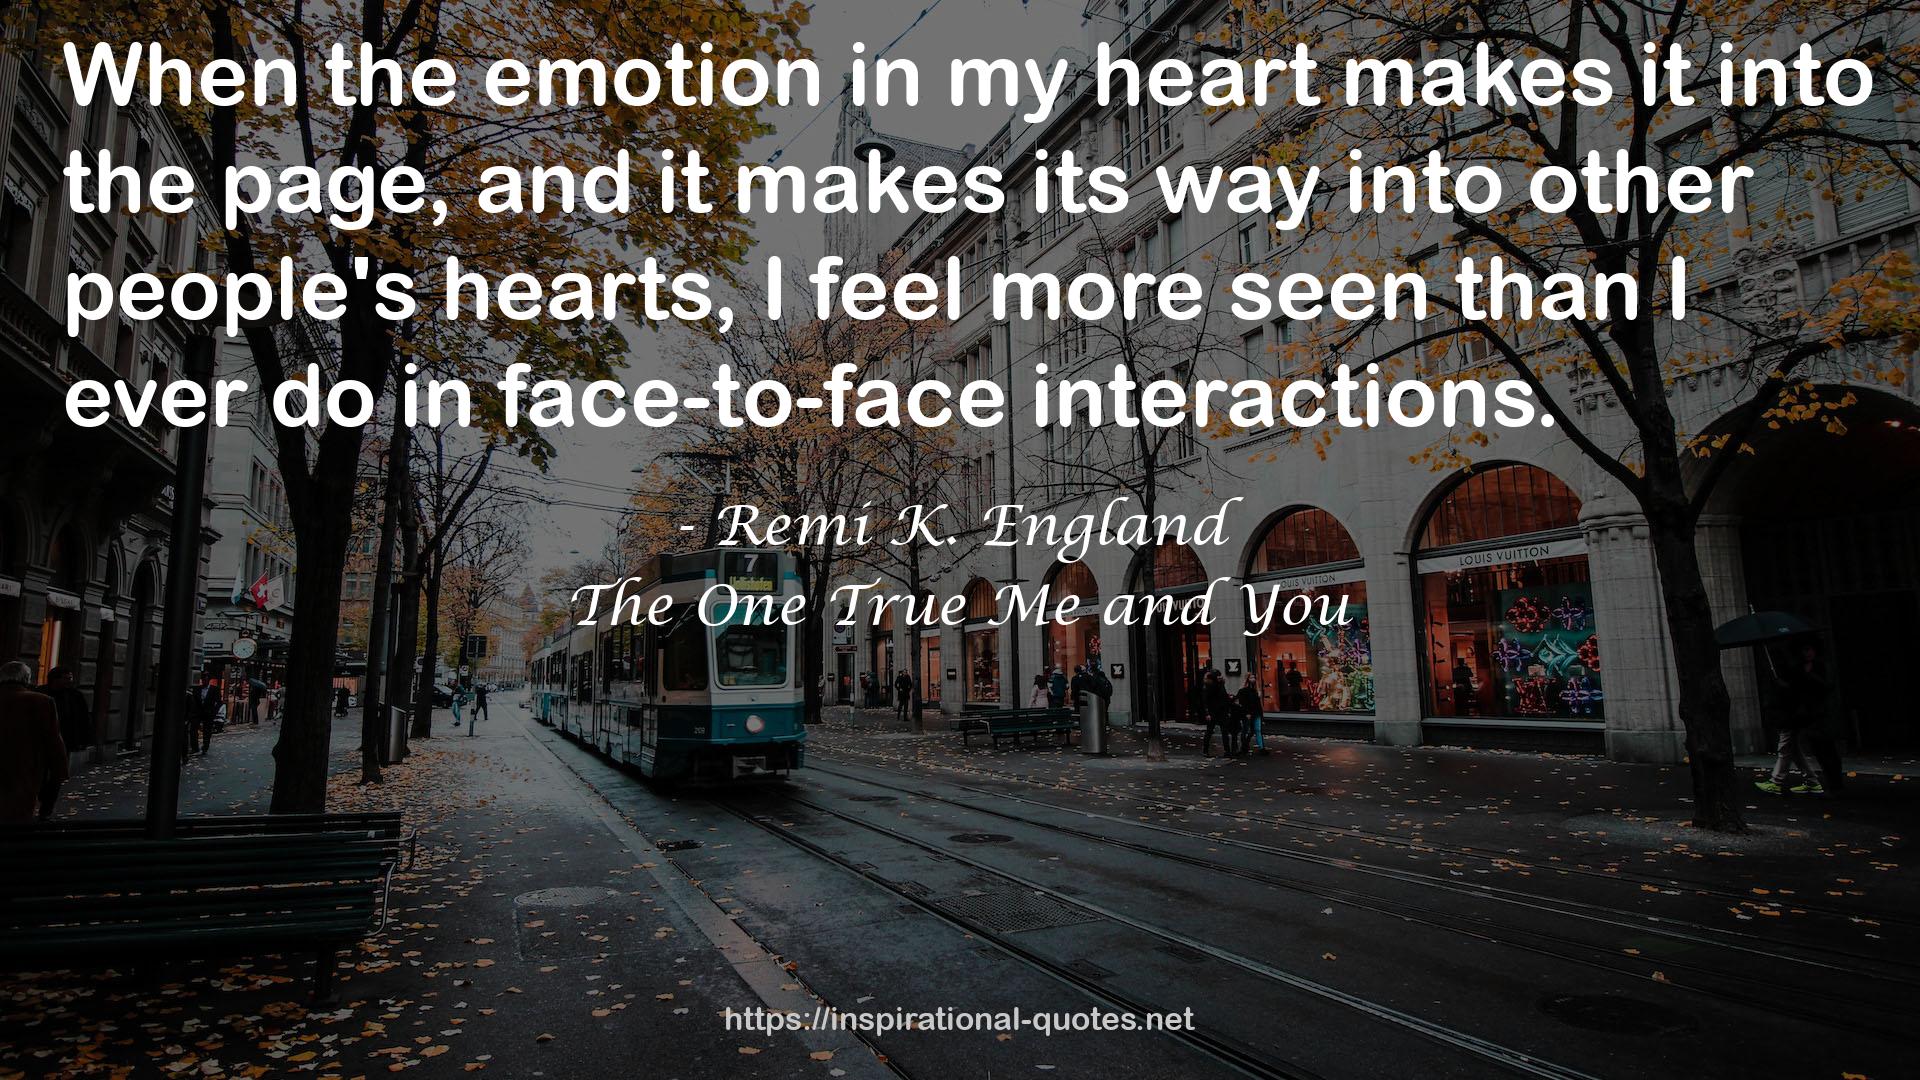 Remi K. England QUOTES